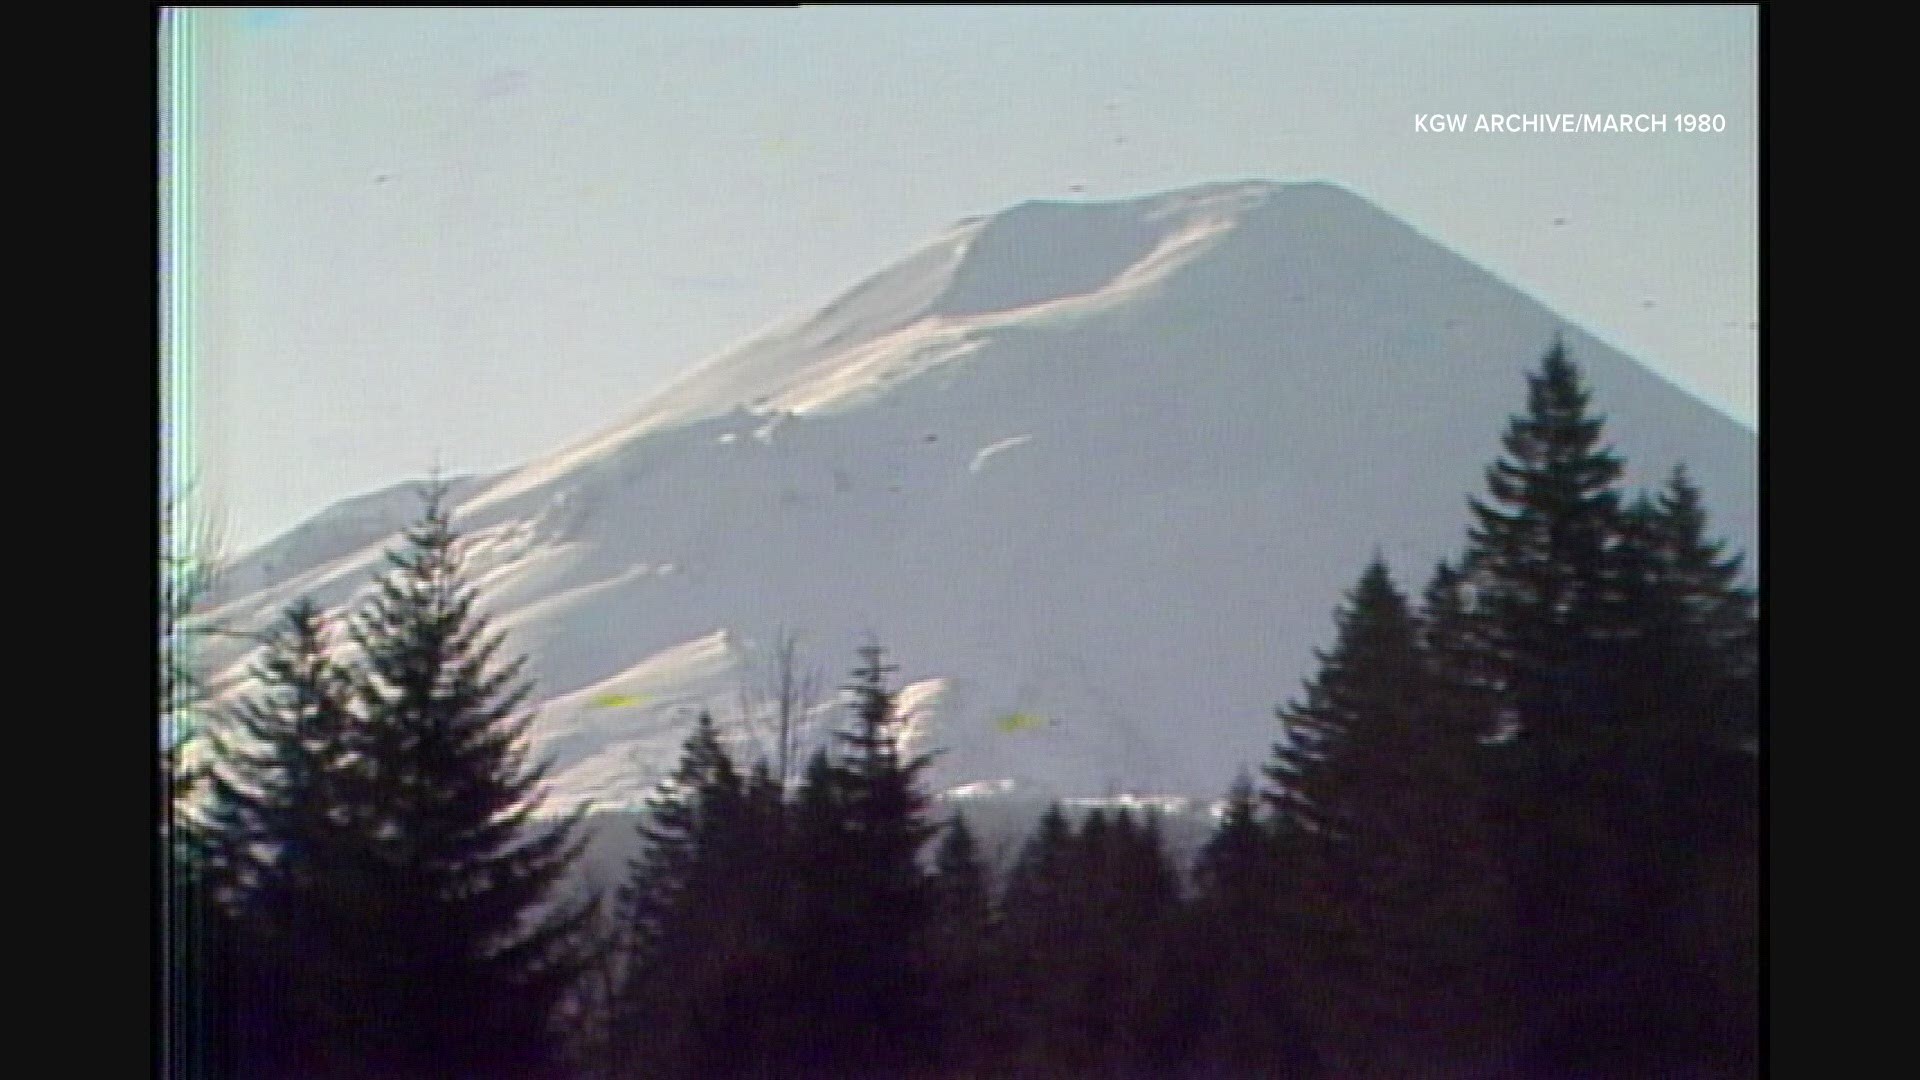 The bounceback of Mount St. Helens after its 1980 eruption is due to one pesky animal. Scientists continue to study the volcano to learn more about its activity.